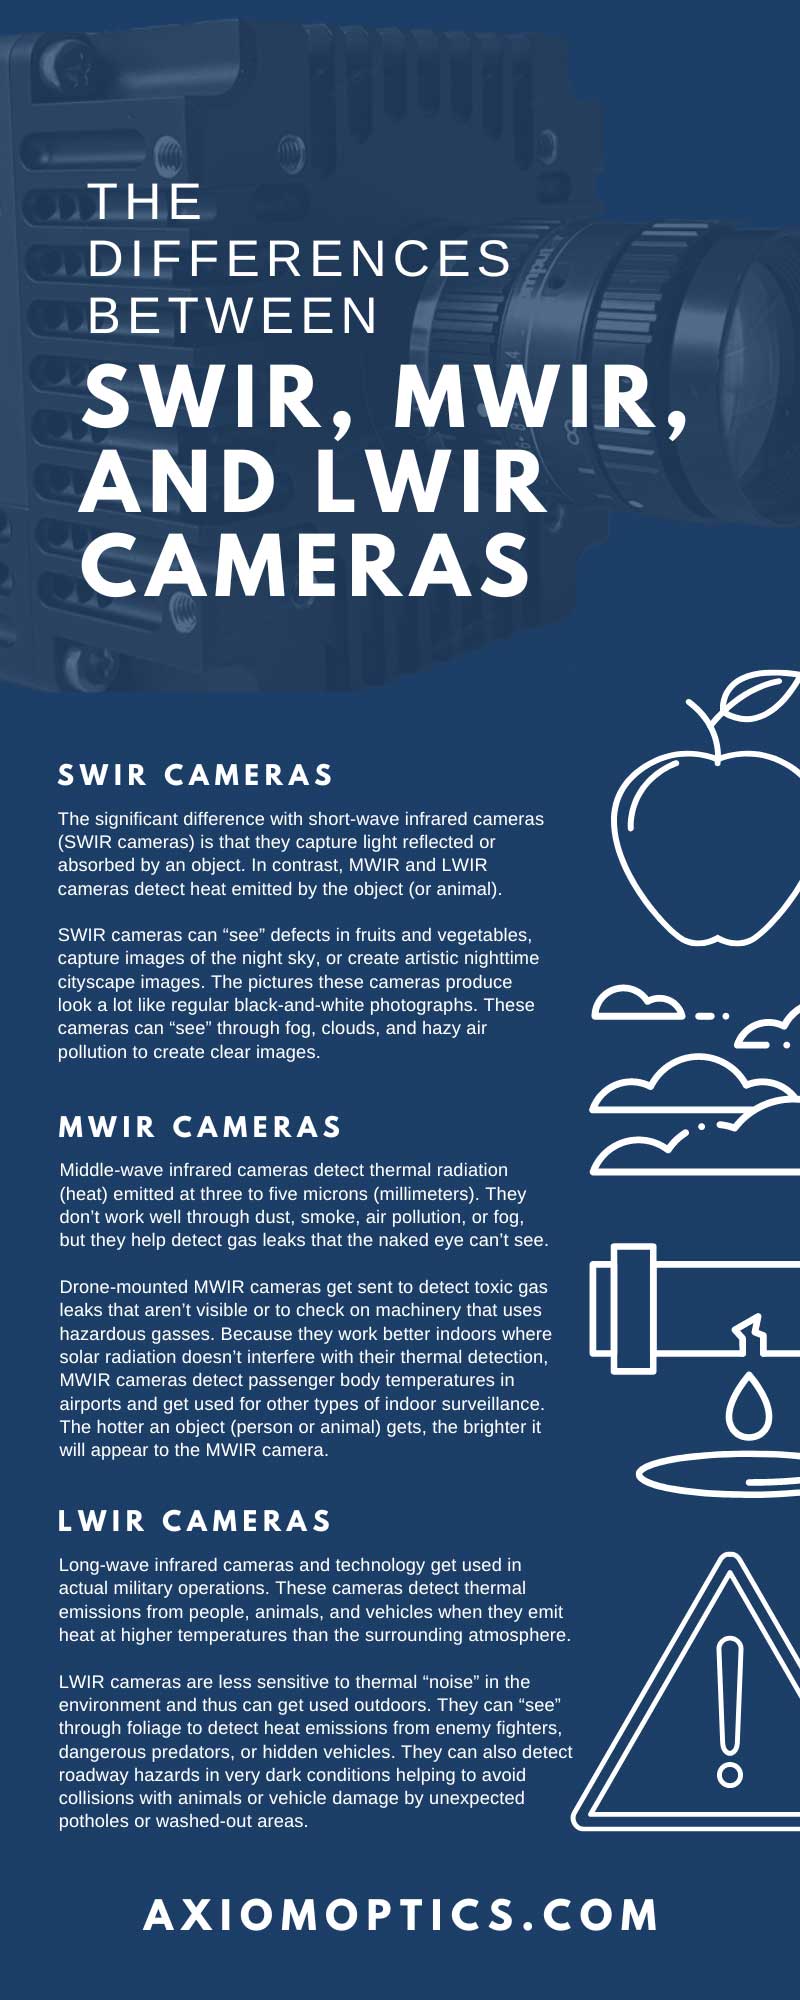 The Differences Between SWIR, MWIR, and LWIR Cameras
